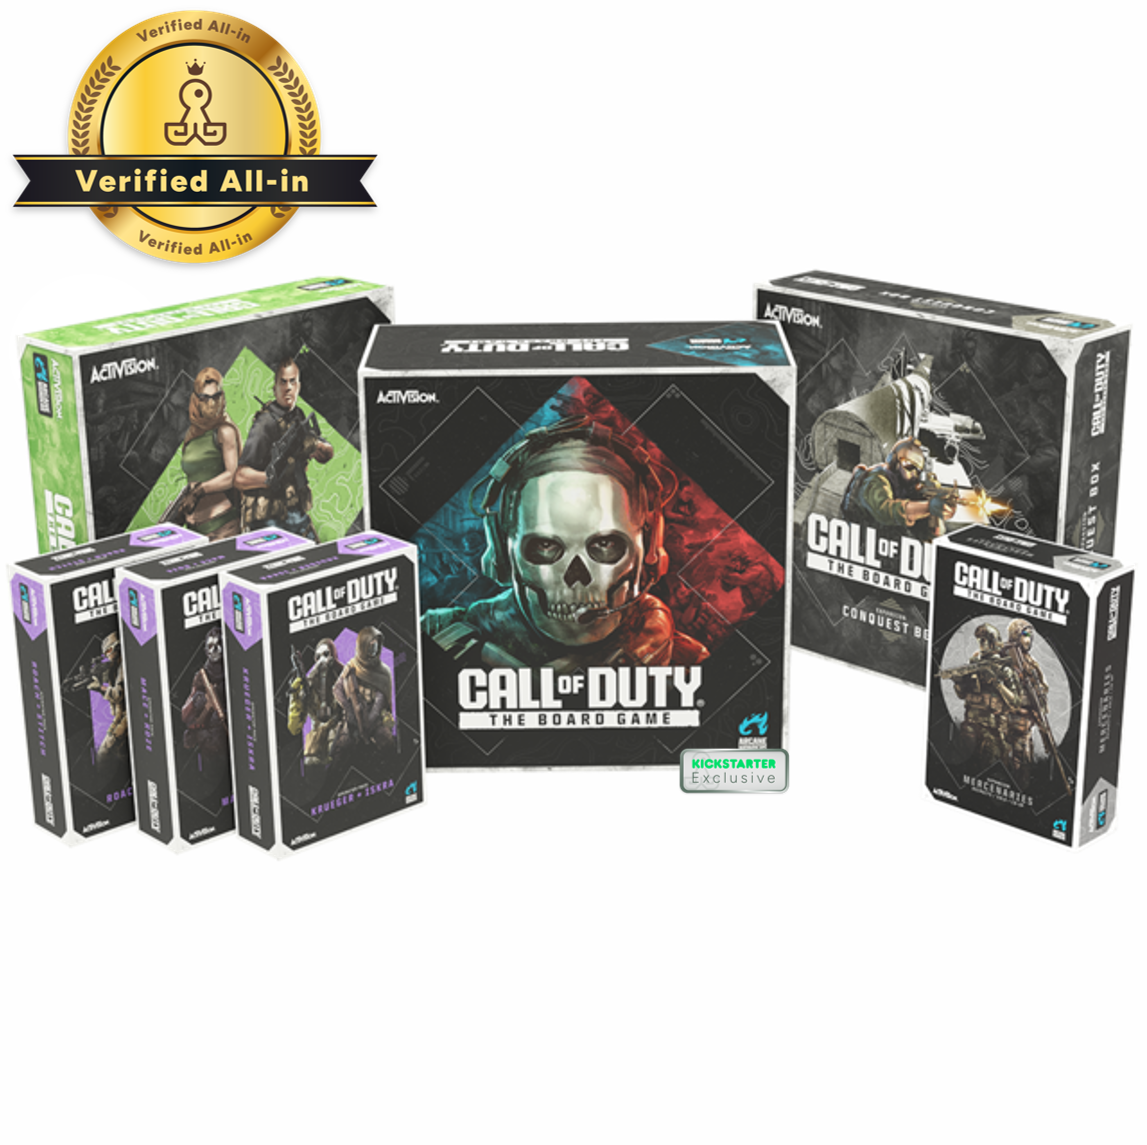 Kickstarter Exclusive Call of Duty The Board Game verified deluxe bundle all-in